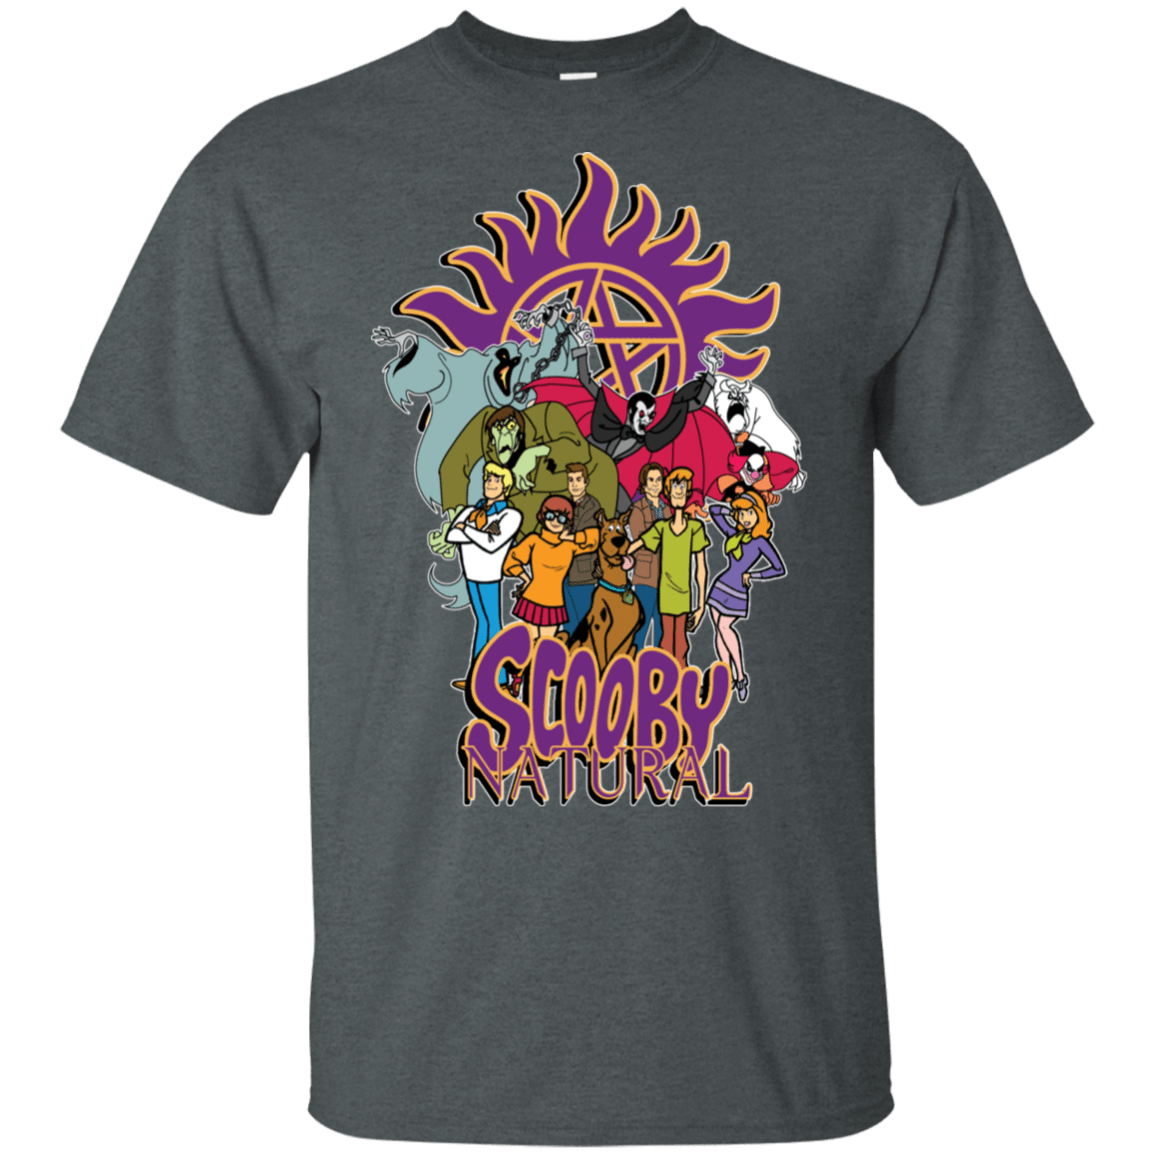 T-Shirts Dark Heather / S Scooby Natural T-Shirt